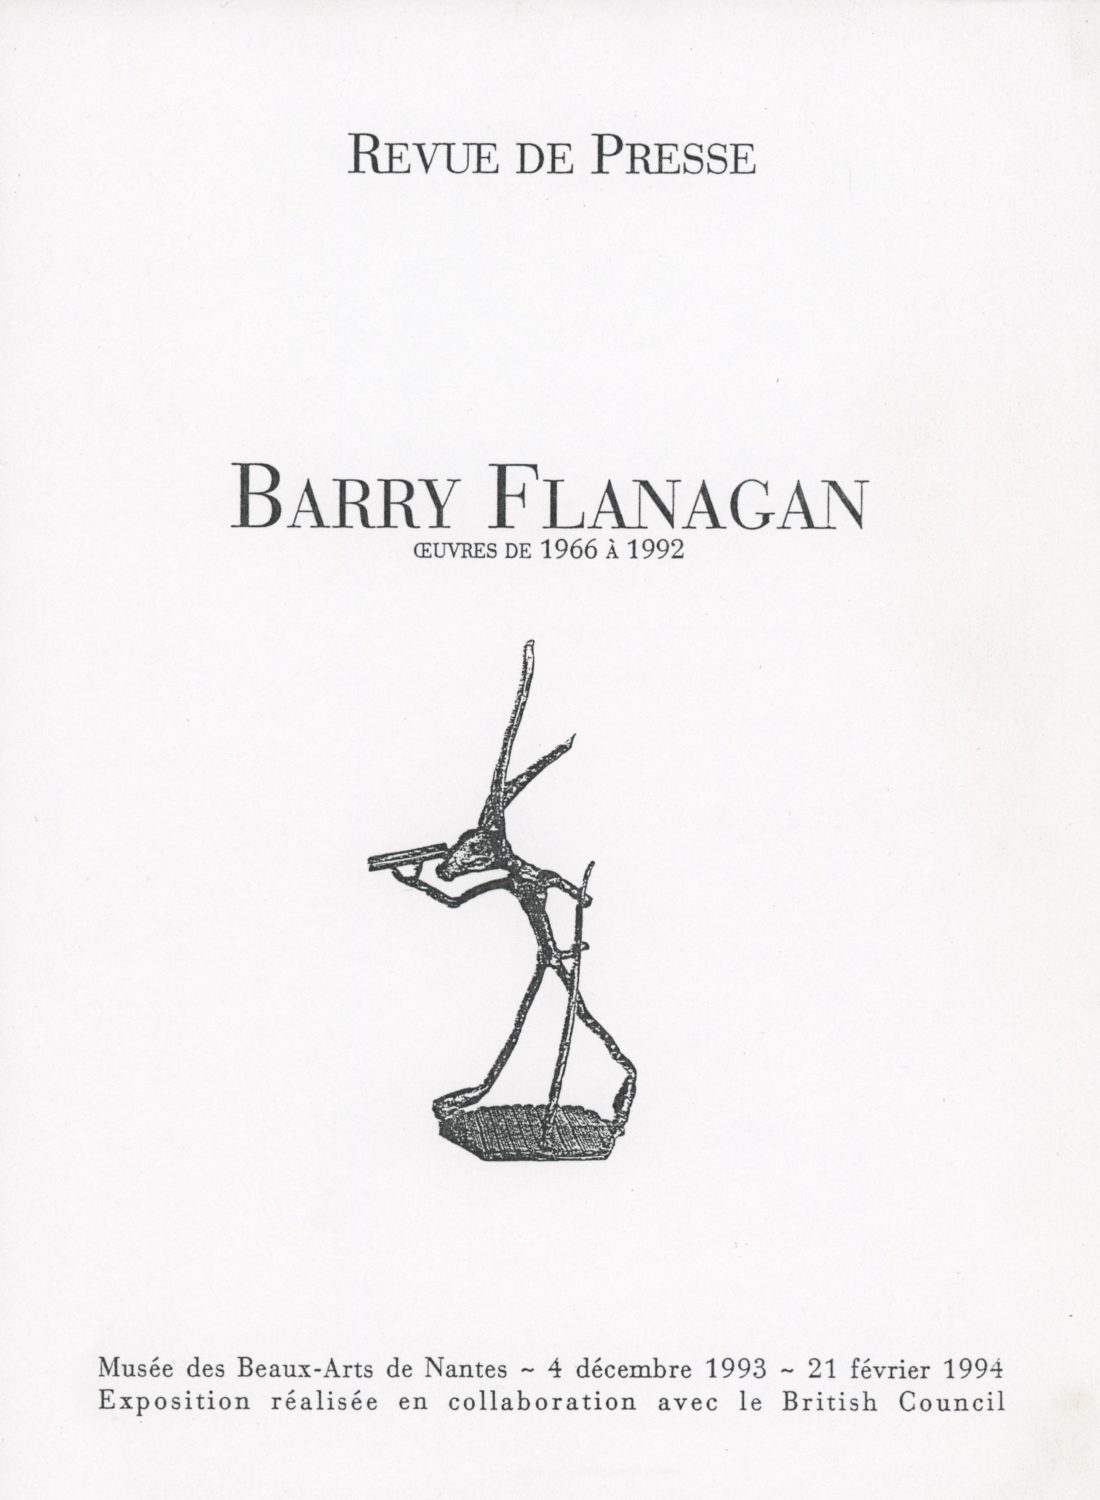 ‘Barry Flanagan oeuvres de 1966 a 1992’ (January – February 1994)